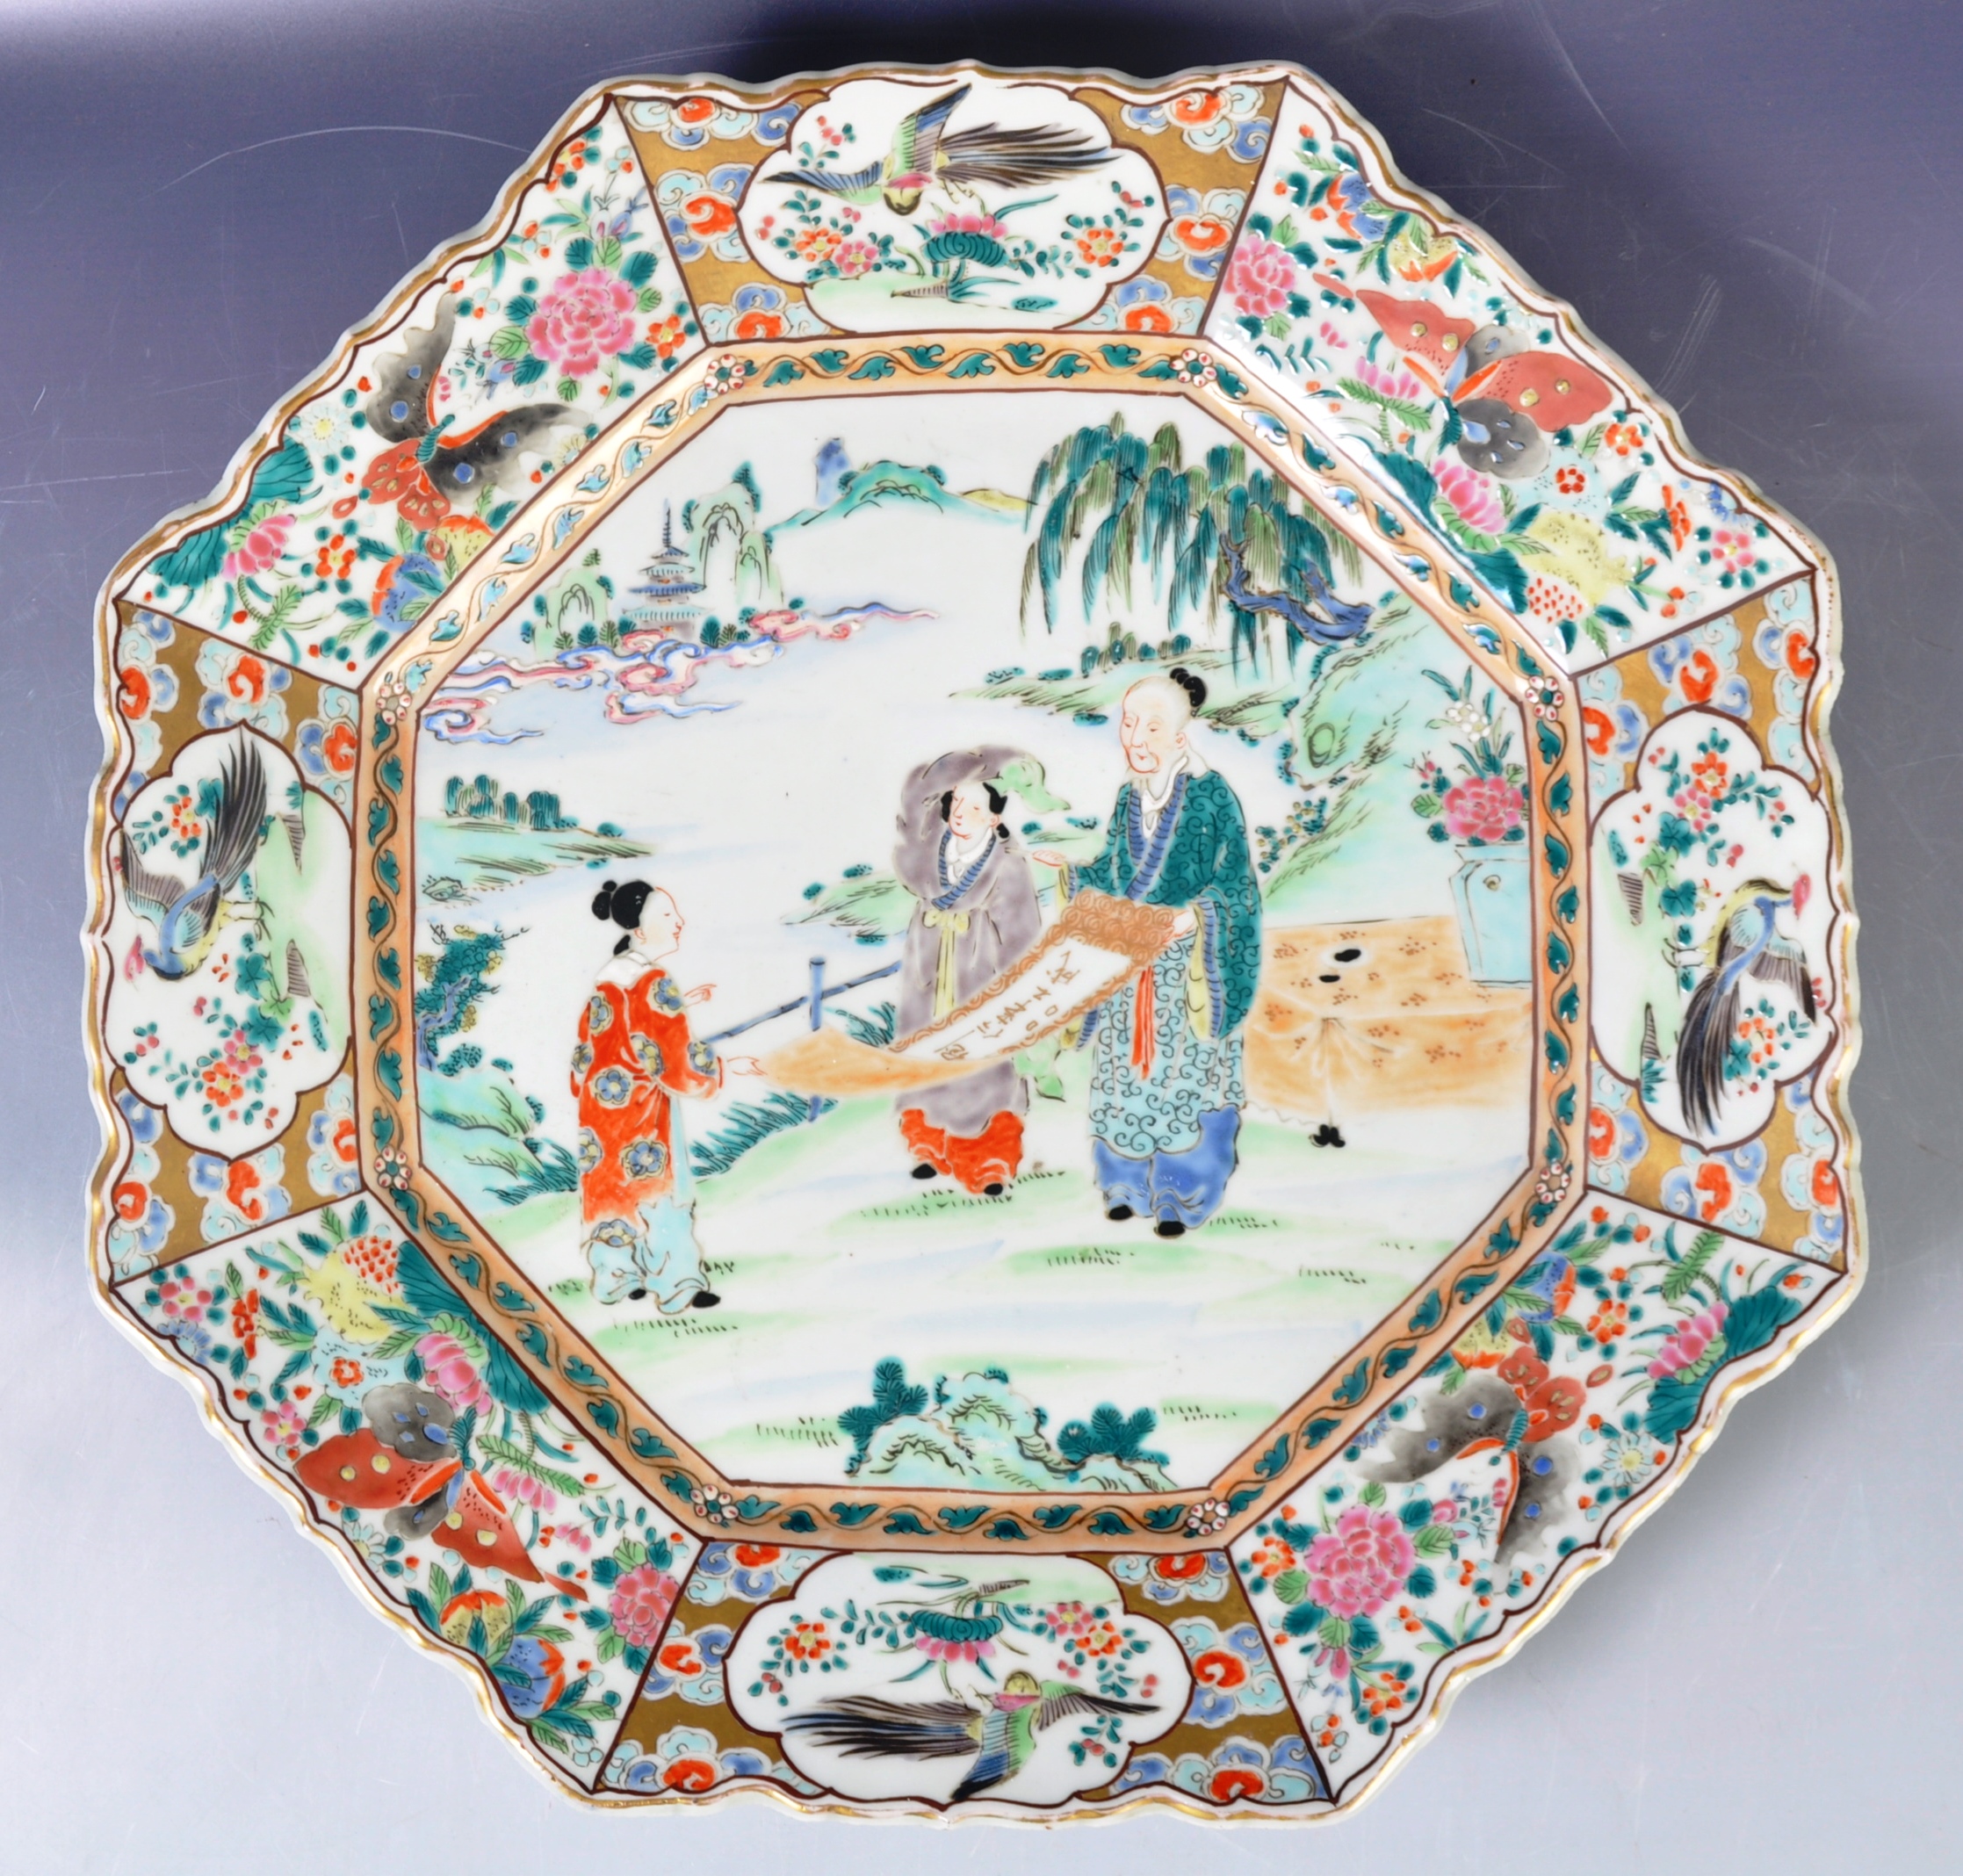 ANTIQUE JAPANESE MEIJI PERIOD PORCELAIN CHARGER PLATE